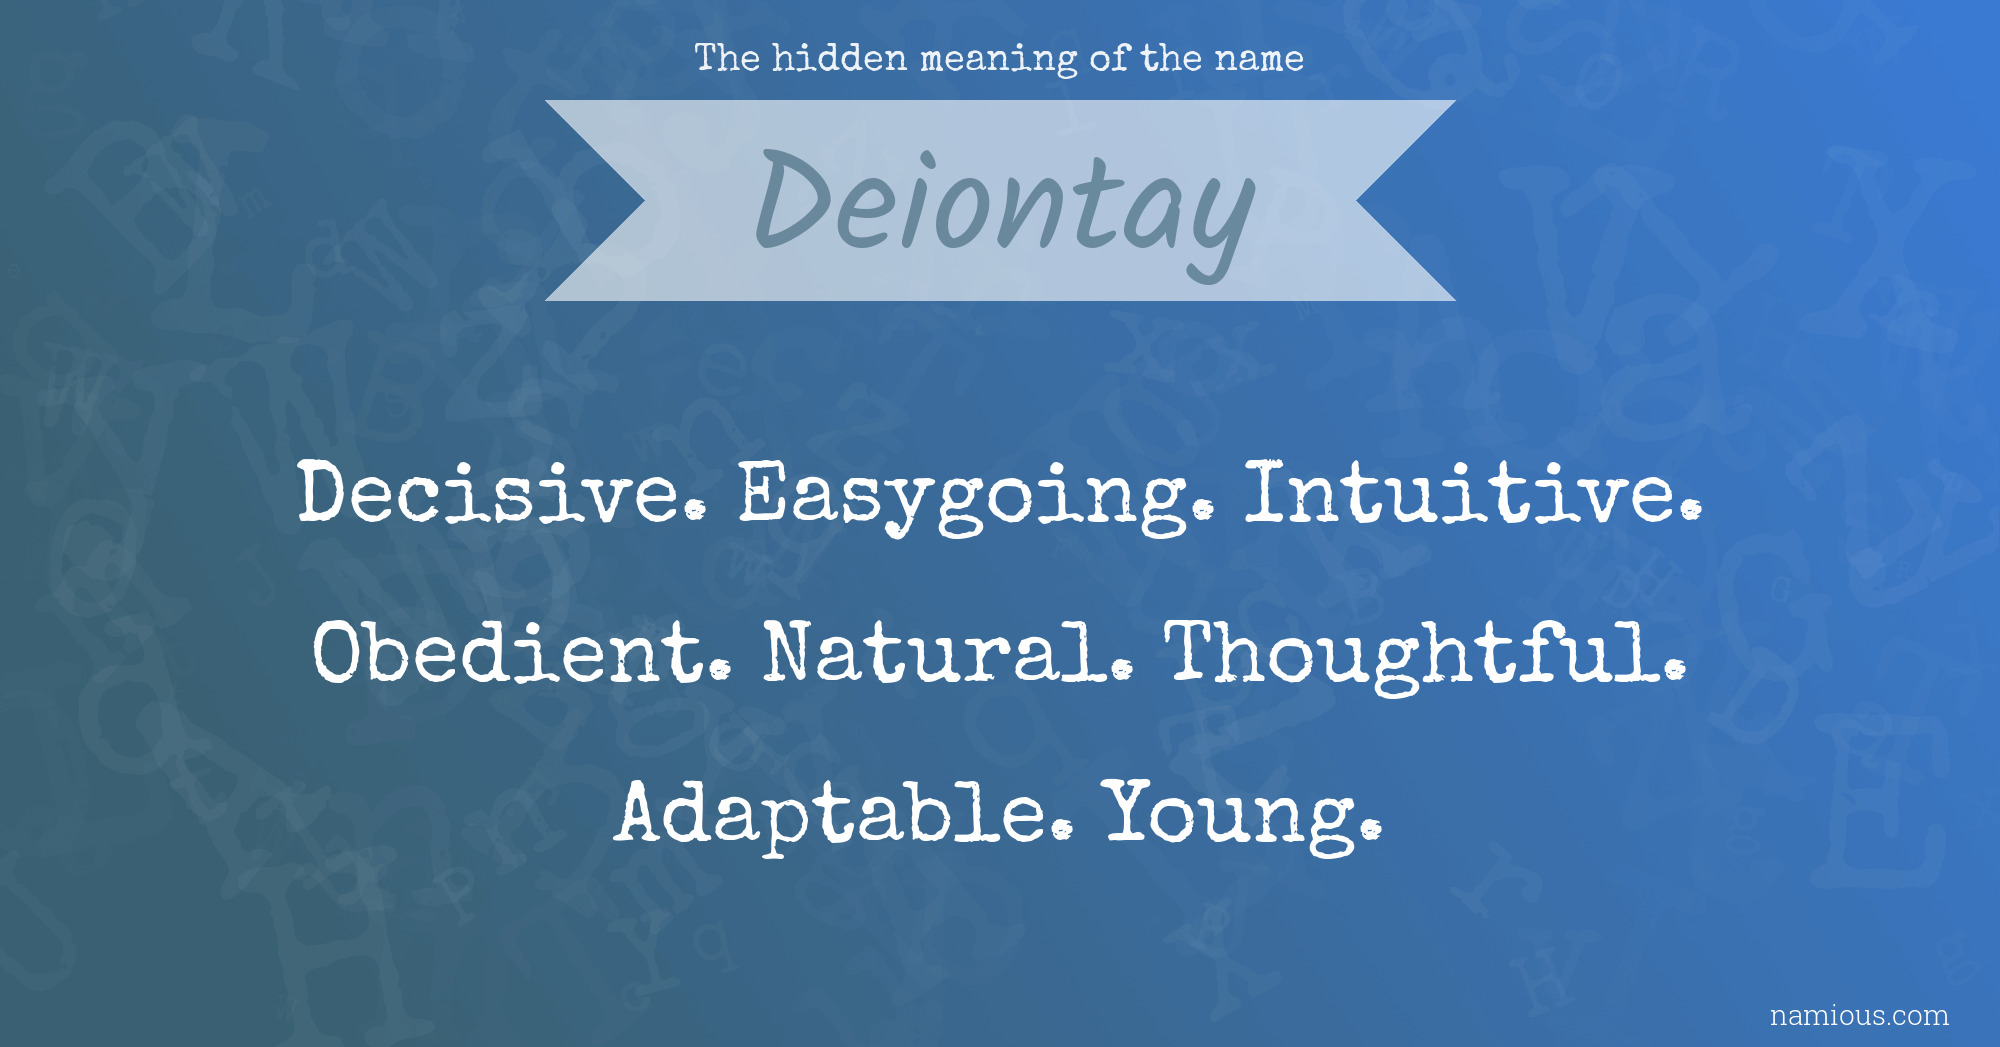 The hidden meaning of the name Deiontay